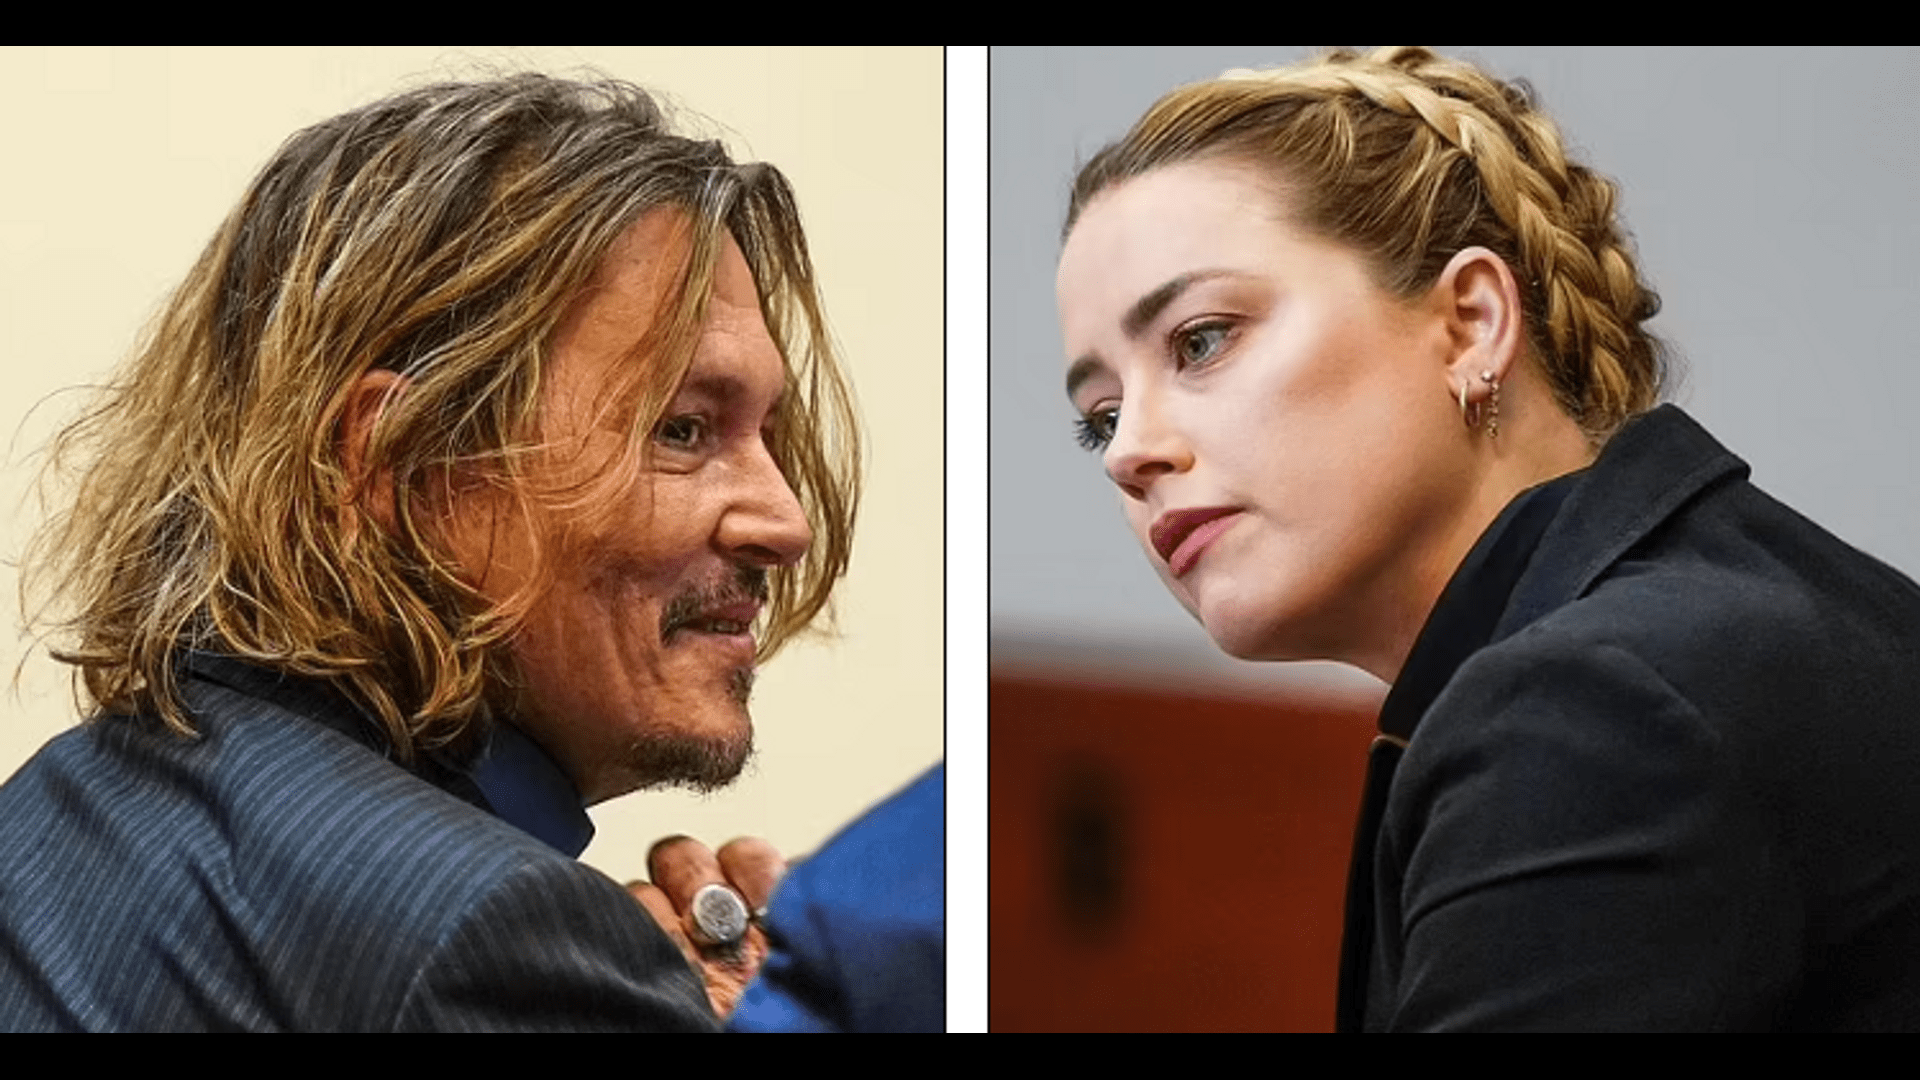 Former assistant Amber Heard says the actress has always been 'aggressive